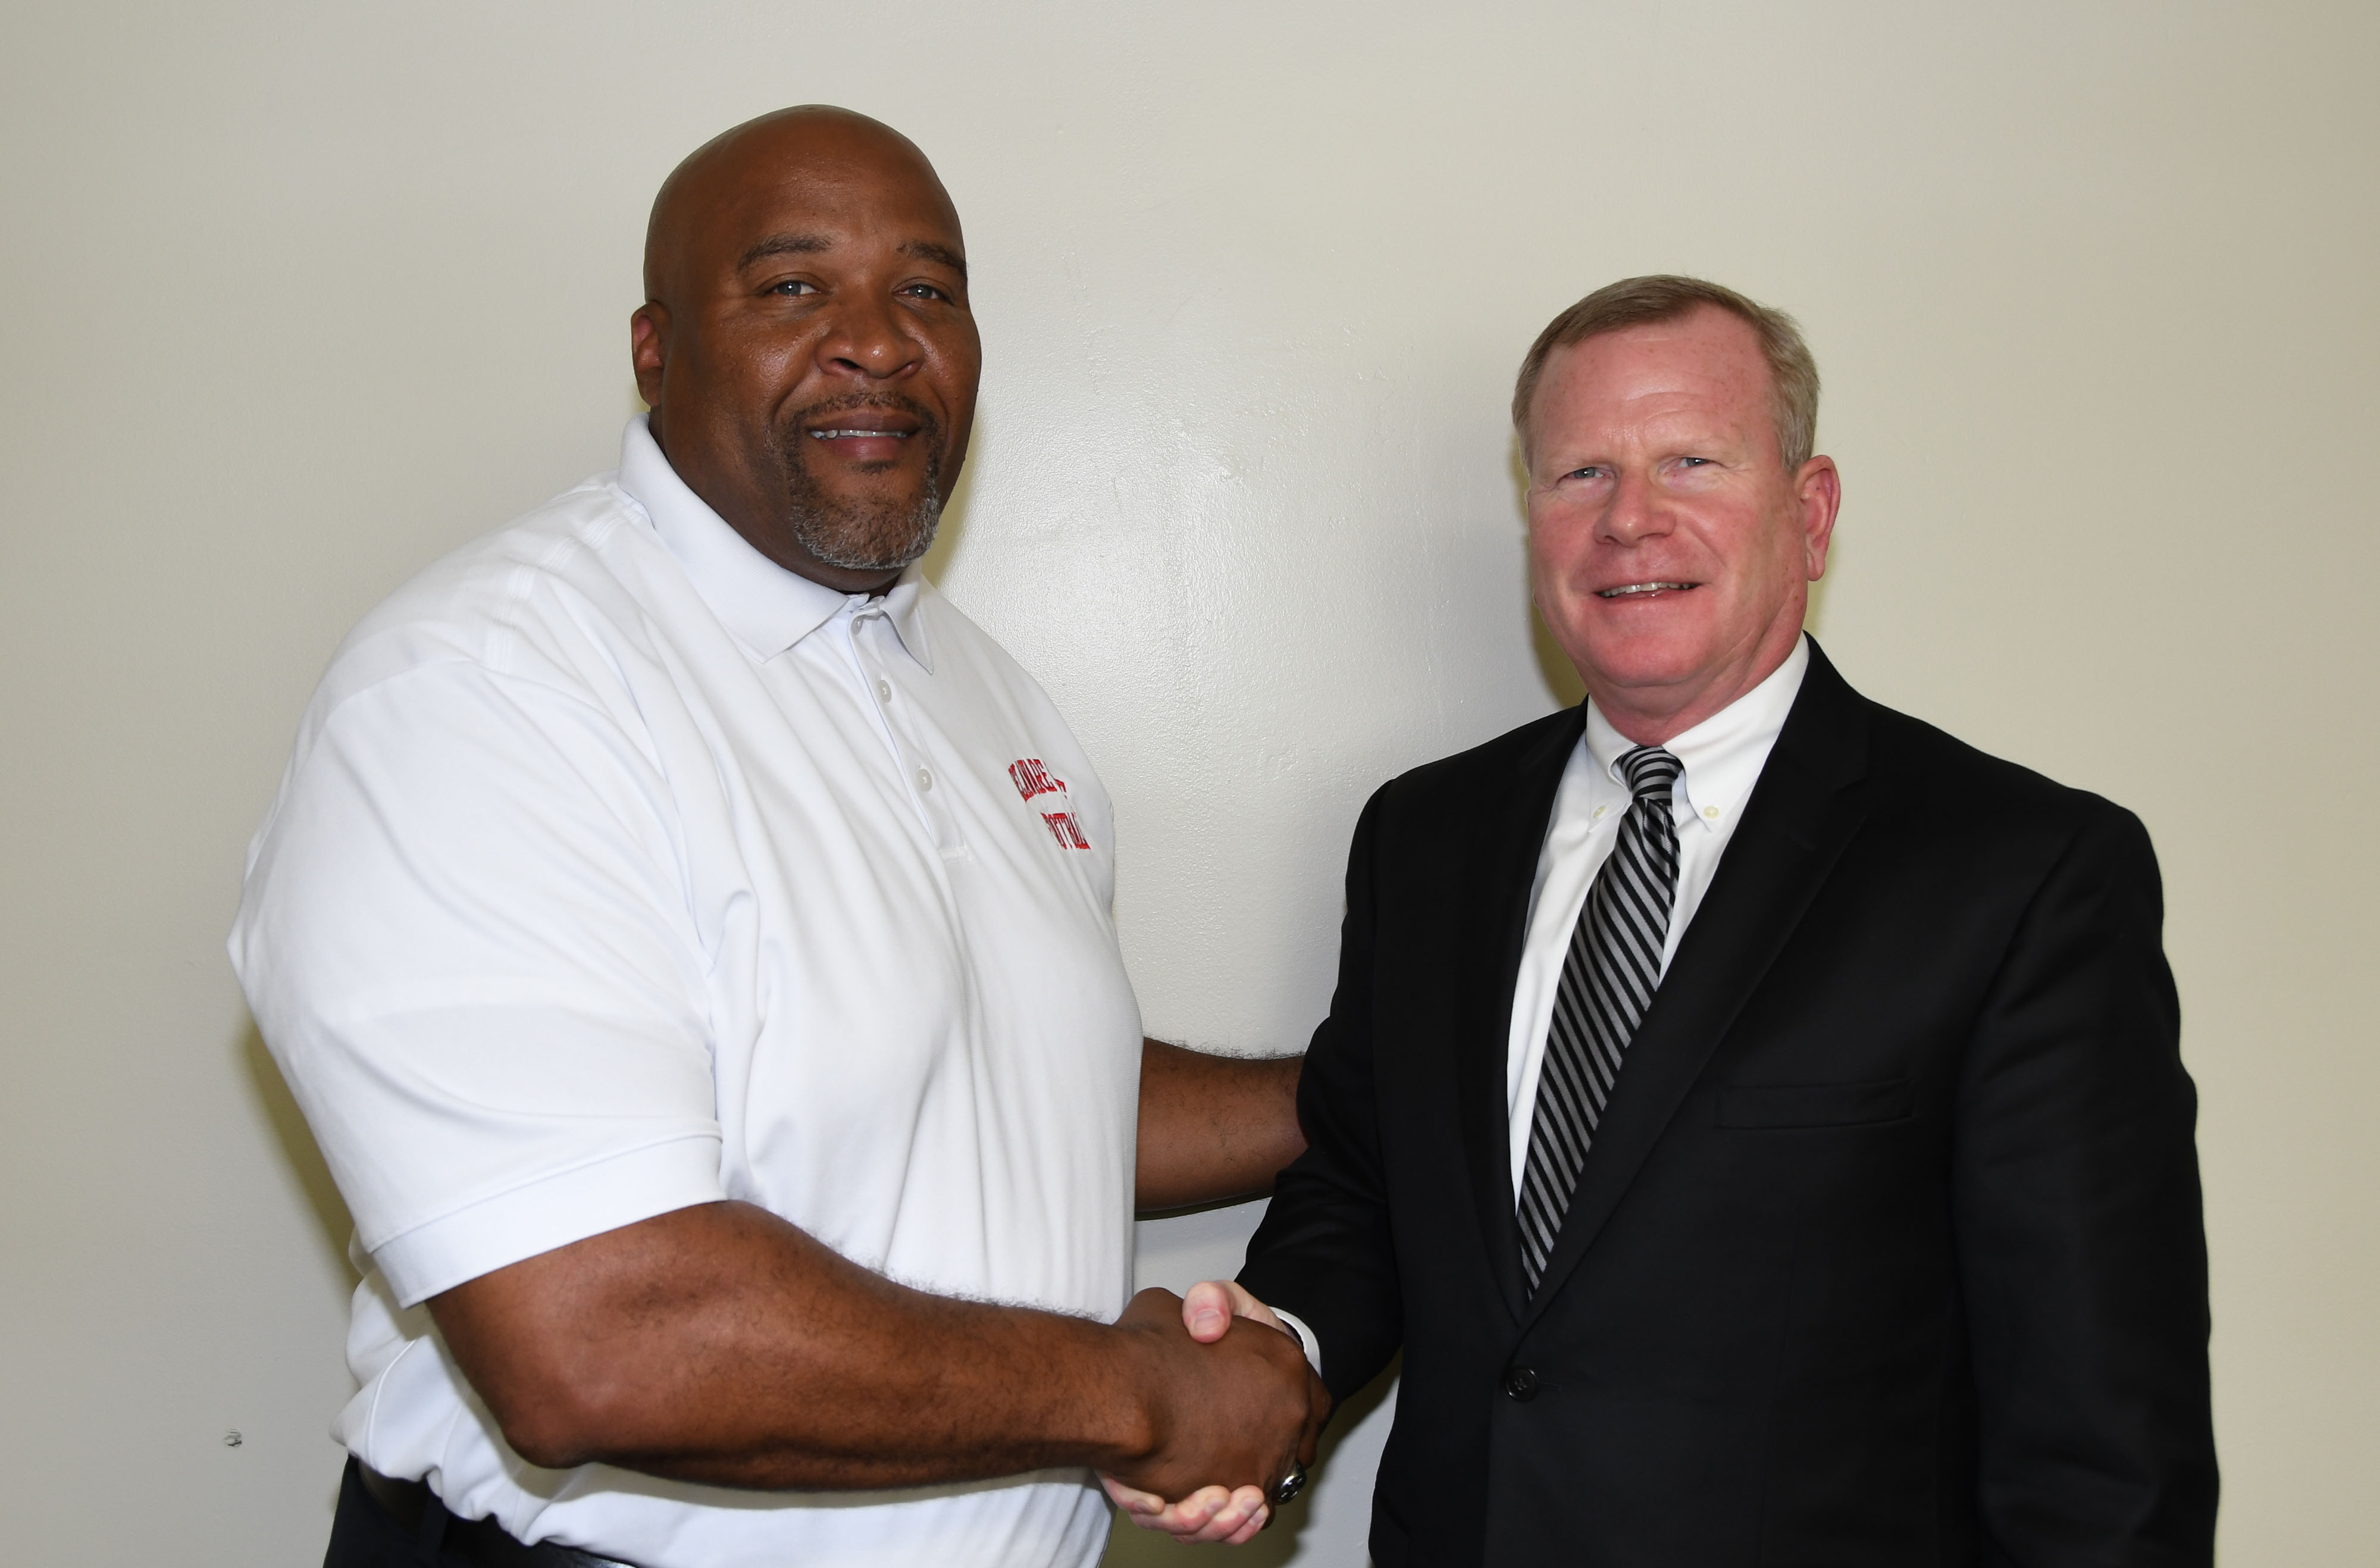 DSU Head Football Coach Rod Milstead welcomes his new boss (r) Dr. D. Scott Gines, who has been newly named the University's Athletic Director.